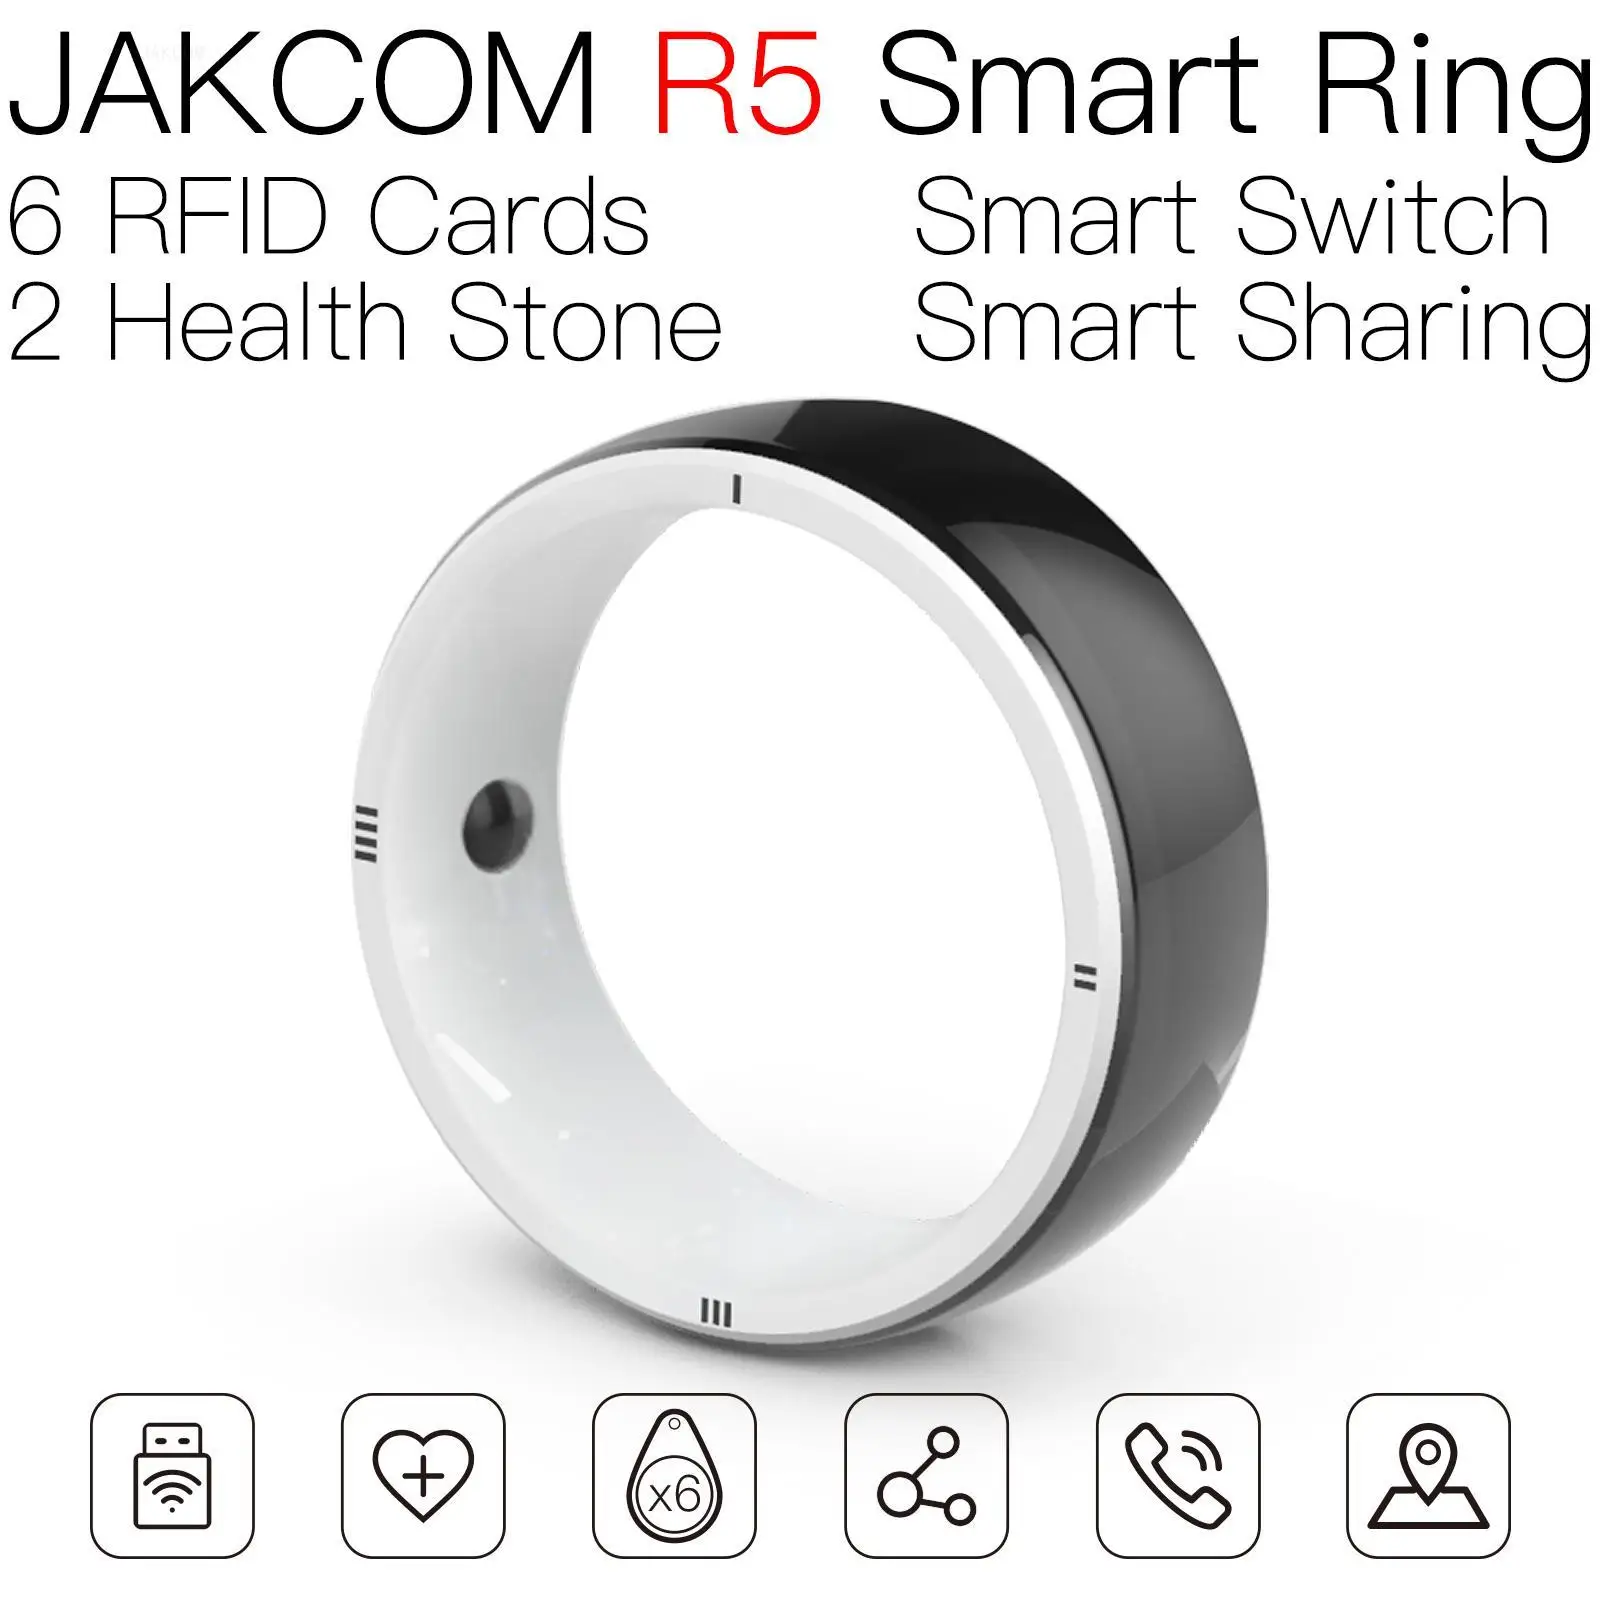 

JAKCOM R5 Smart Ring Newer than card protector rfid uhf passive tags id reader usb autocollant code imei fuel jewelry database